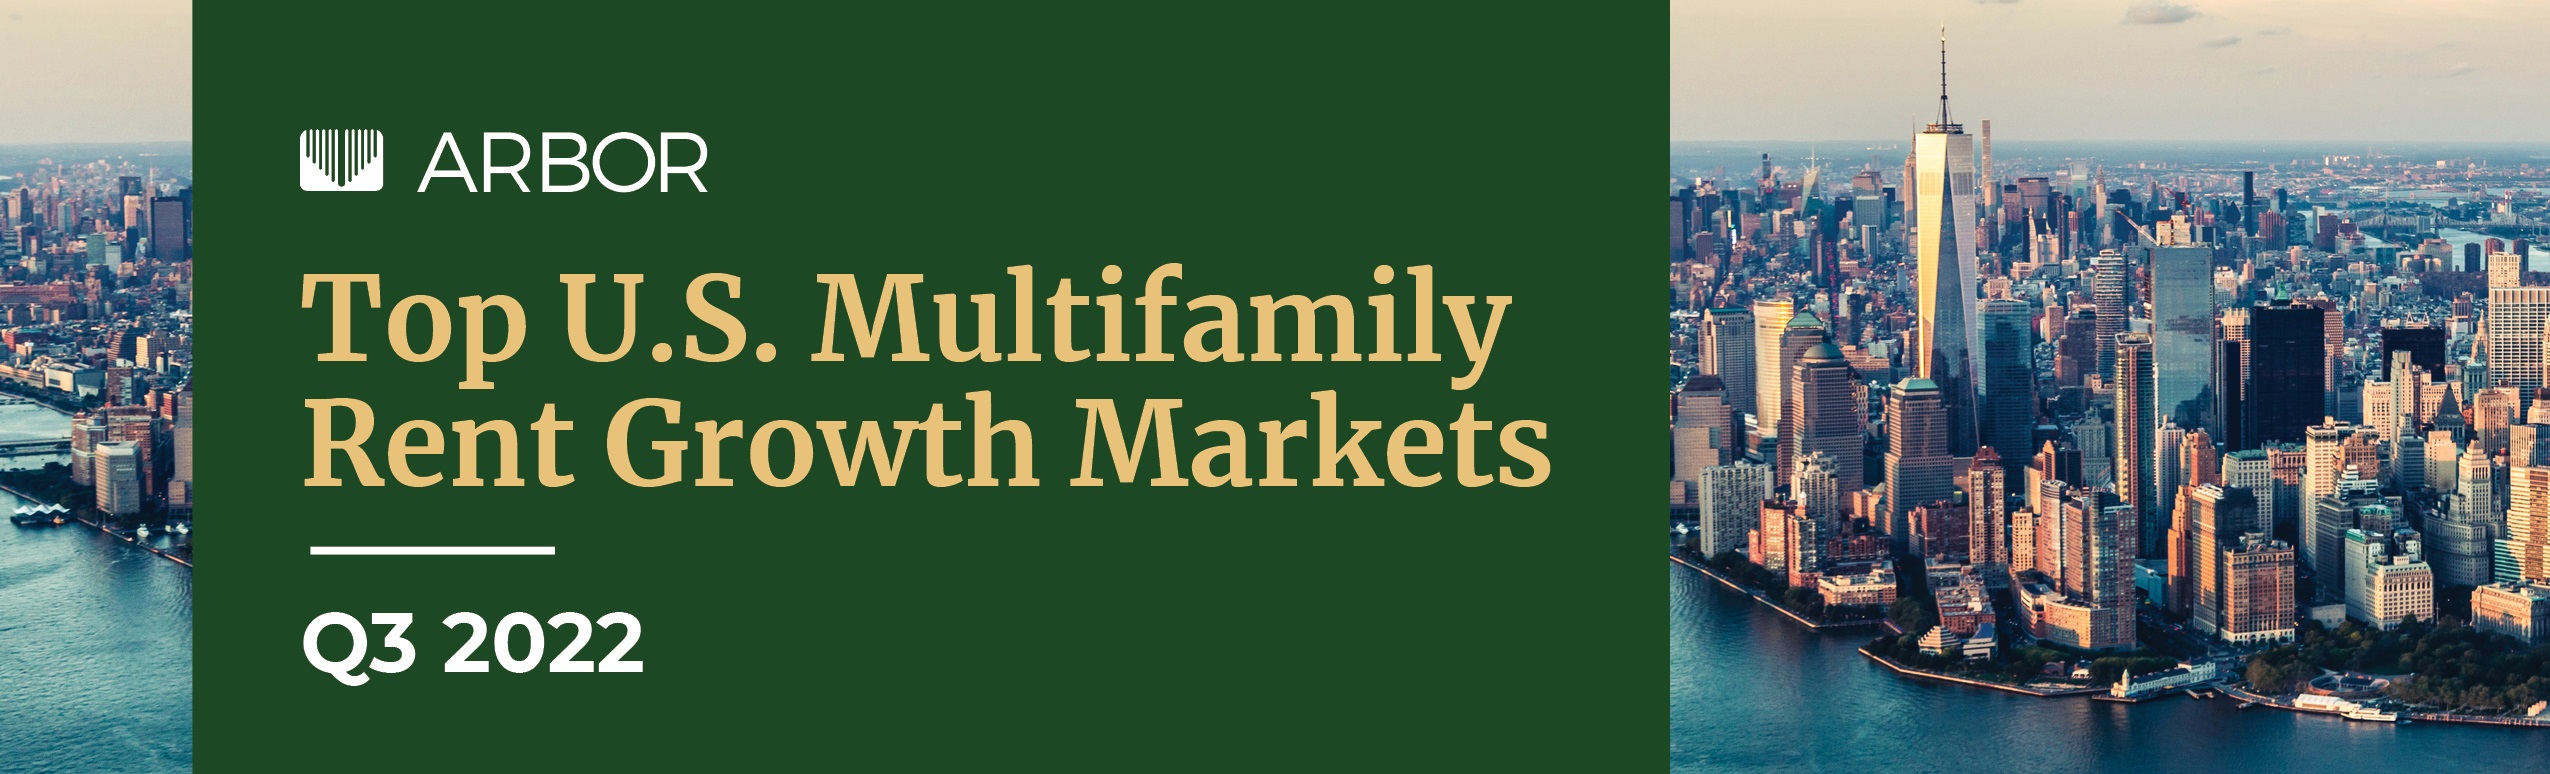 Top U.S. Multifamily Rent Growth Markets — Q3 2022